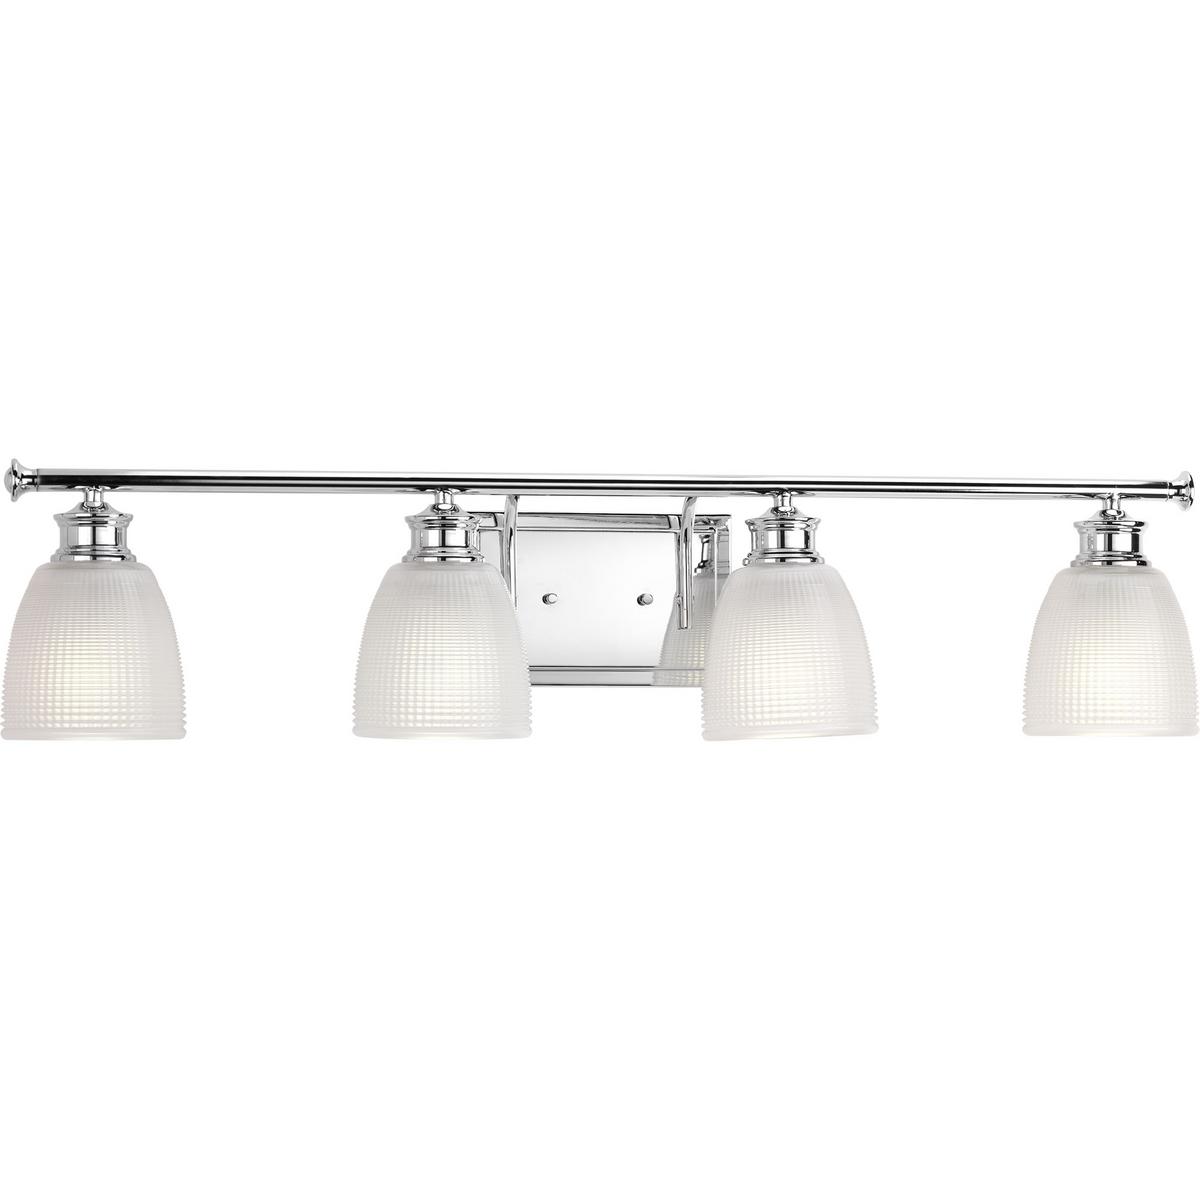 Hubbell P2118-15 Four-light bath from the Lucky Collection, with a distinctive design that evokes a vintage flair with finely crafted details. Light is beautifully illuminated through double prismatic frosted glass shades. Polished Chrome finish.  ; Ideal for a bathroom ;